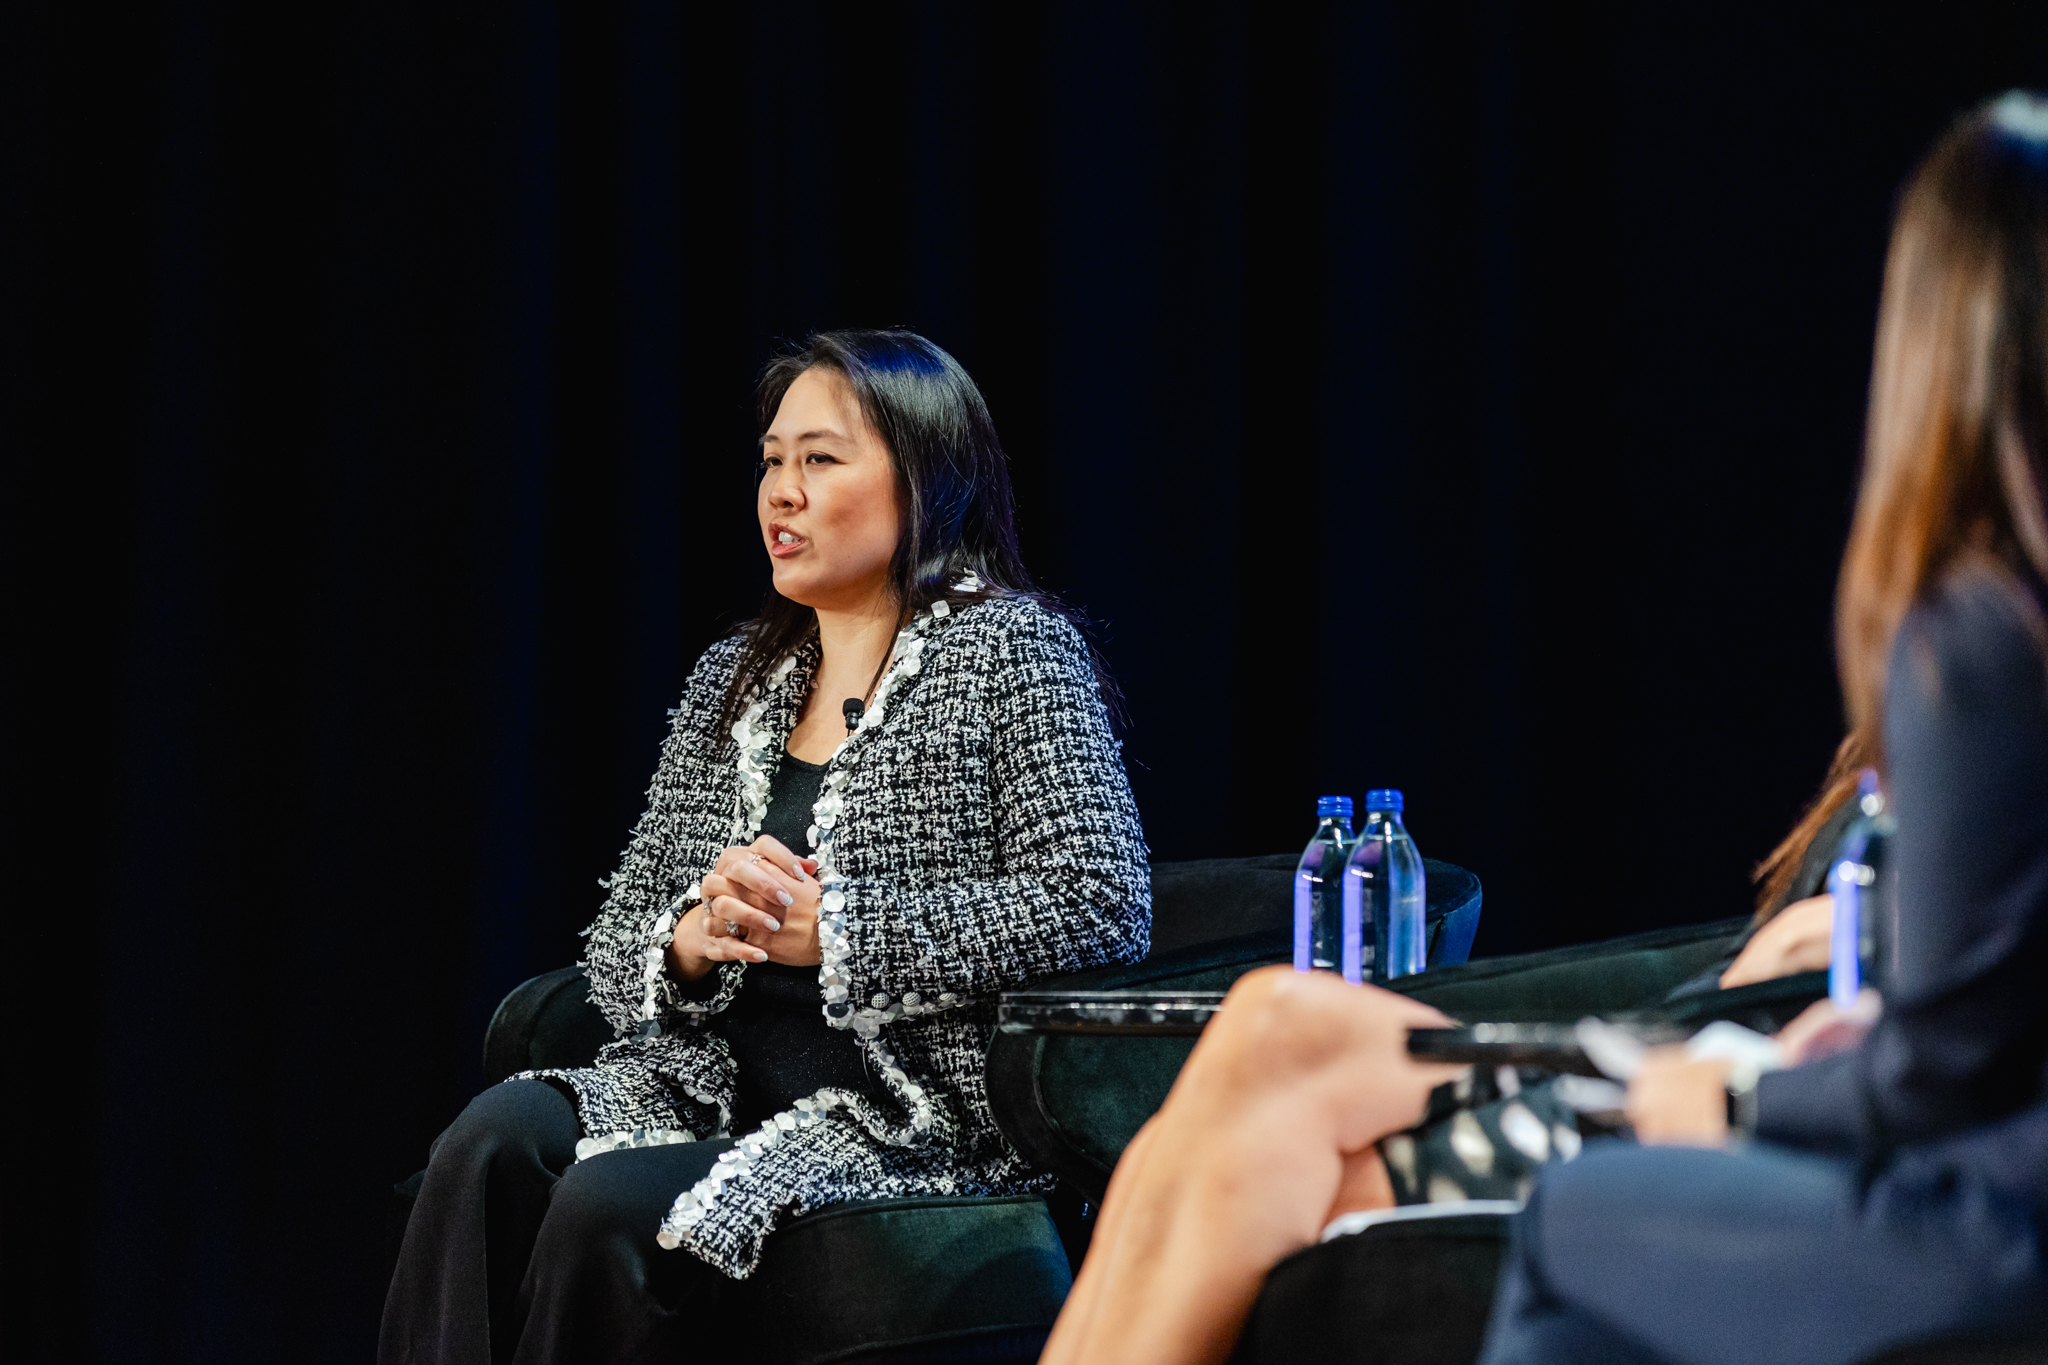 Two women engaged in a meaningful conversation on stage at a conference.